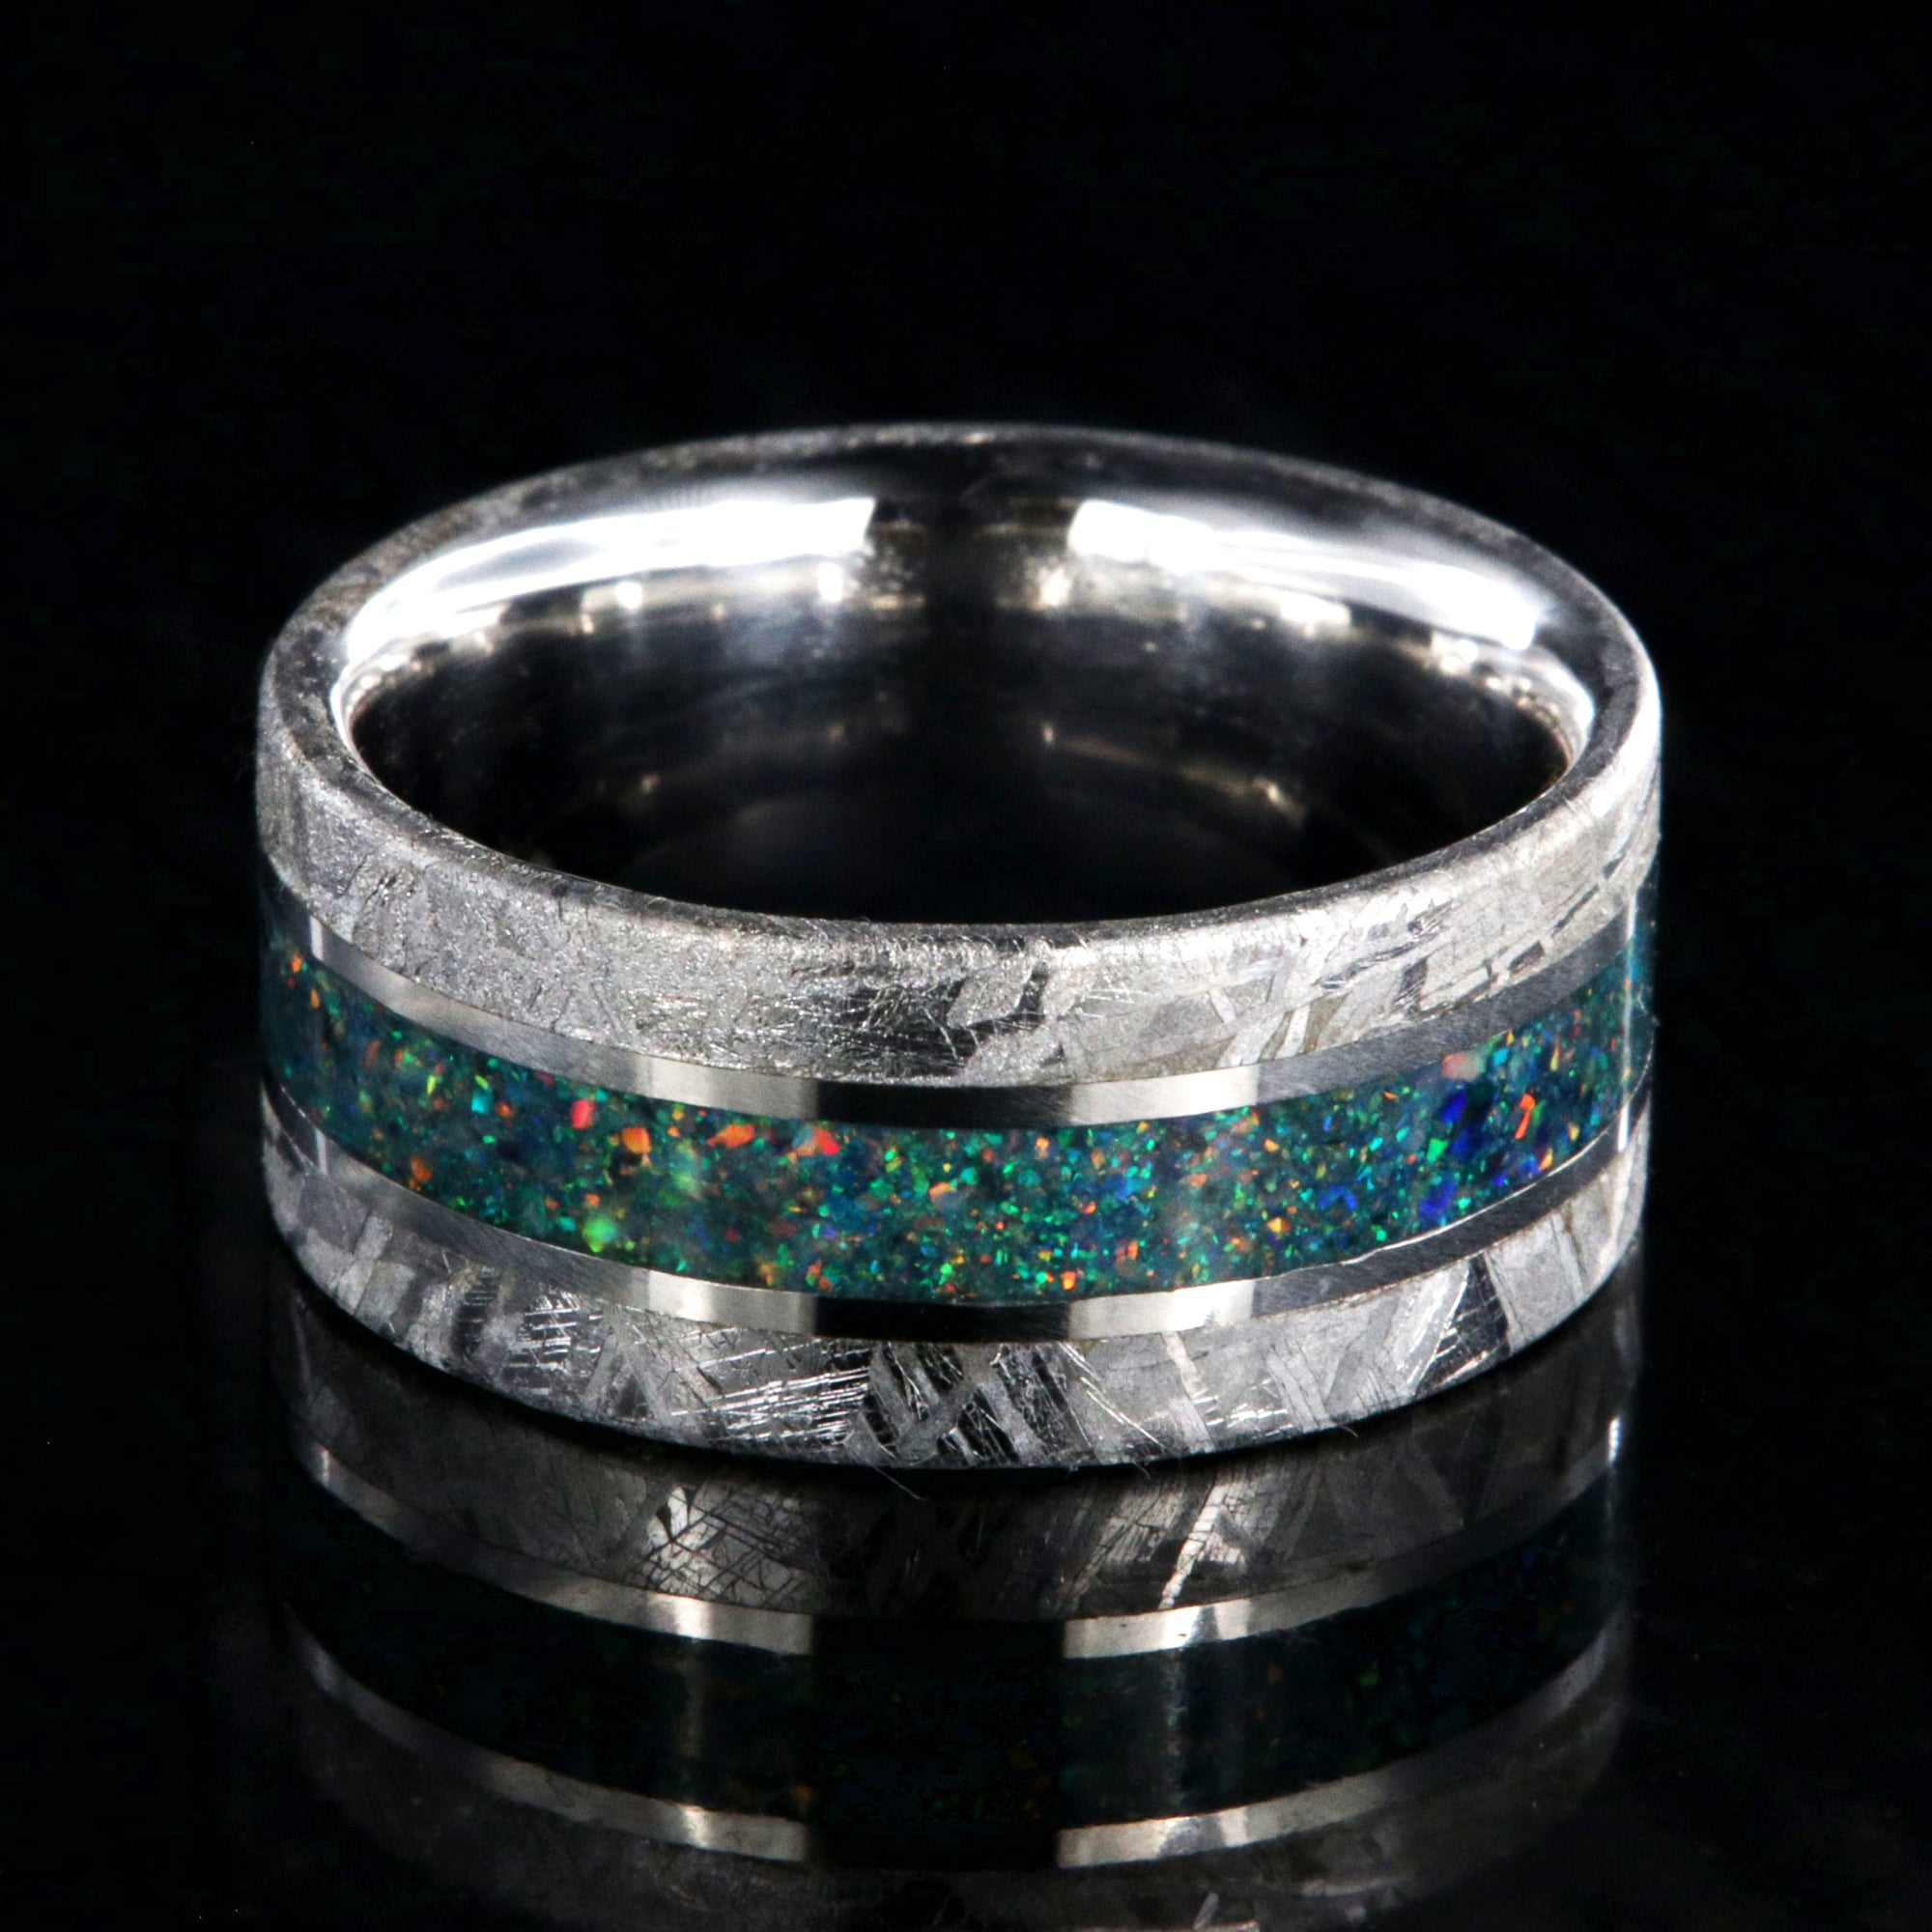 10mm wide cobalt men's wedding ring with Gibeon meteorite edges and a glacial opal inlay